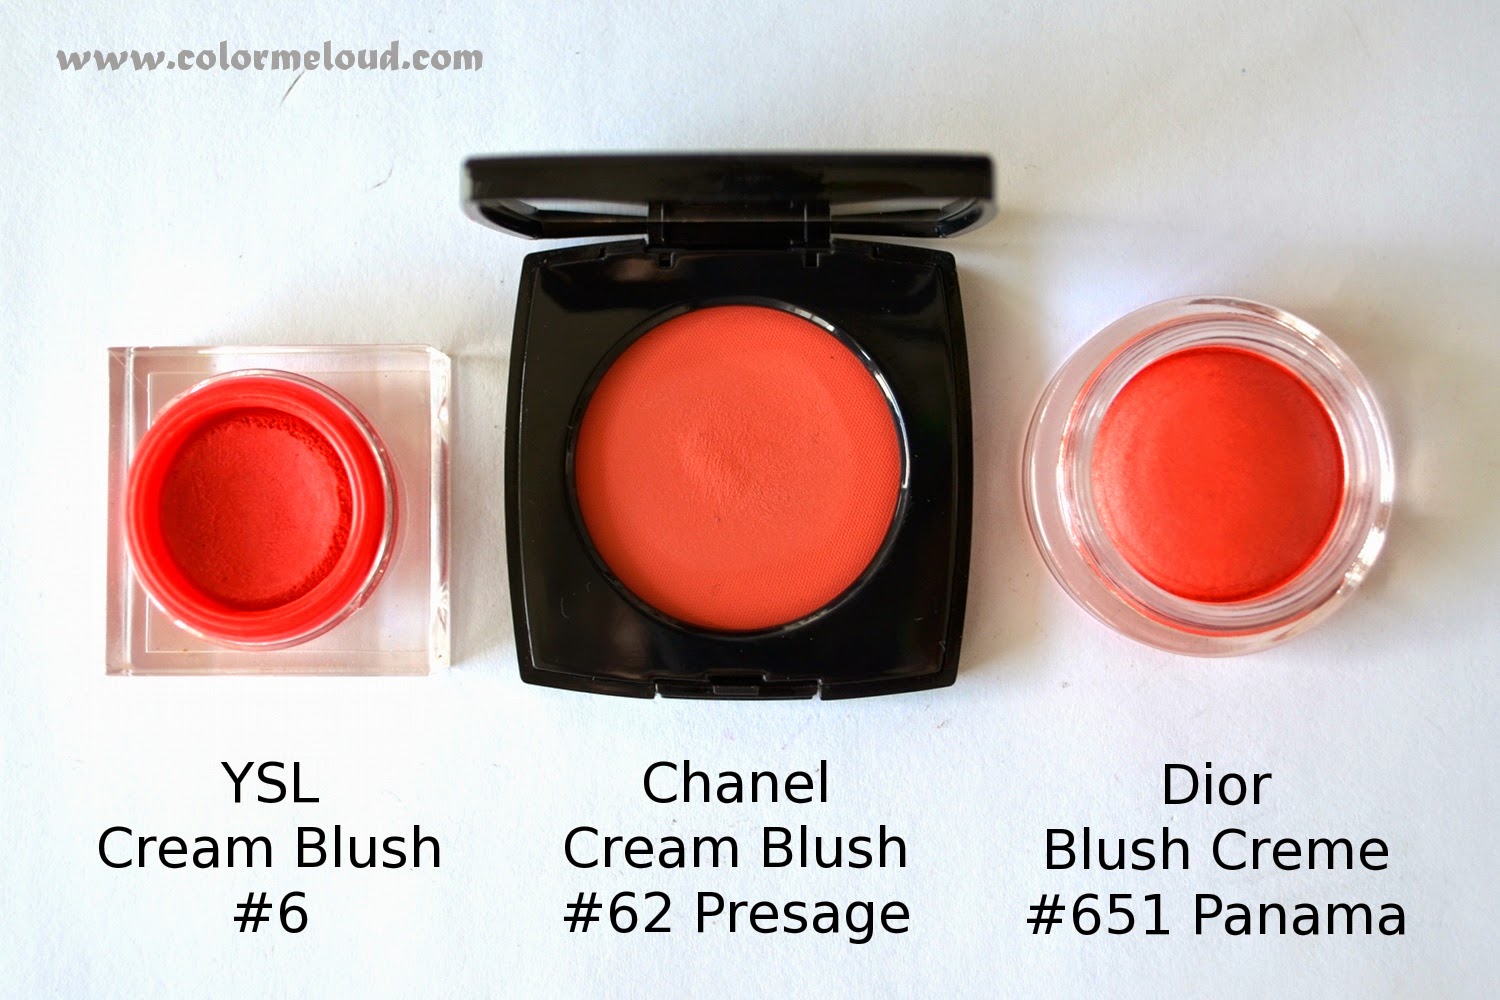 Chanel #62 Presage, Le Blush Creme de Chanel from Superstition Collection  for Fall 2013